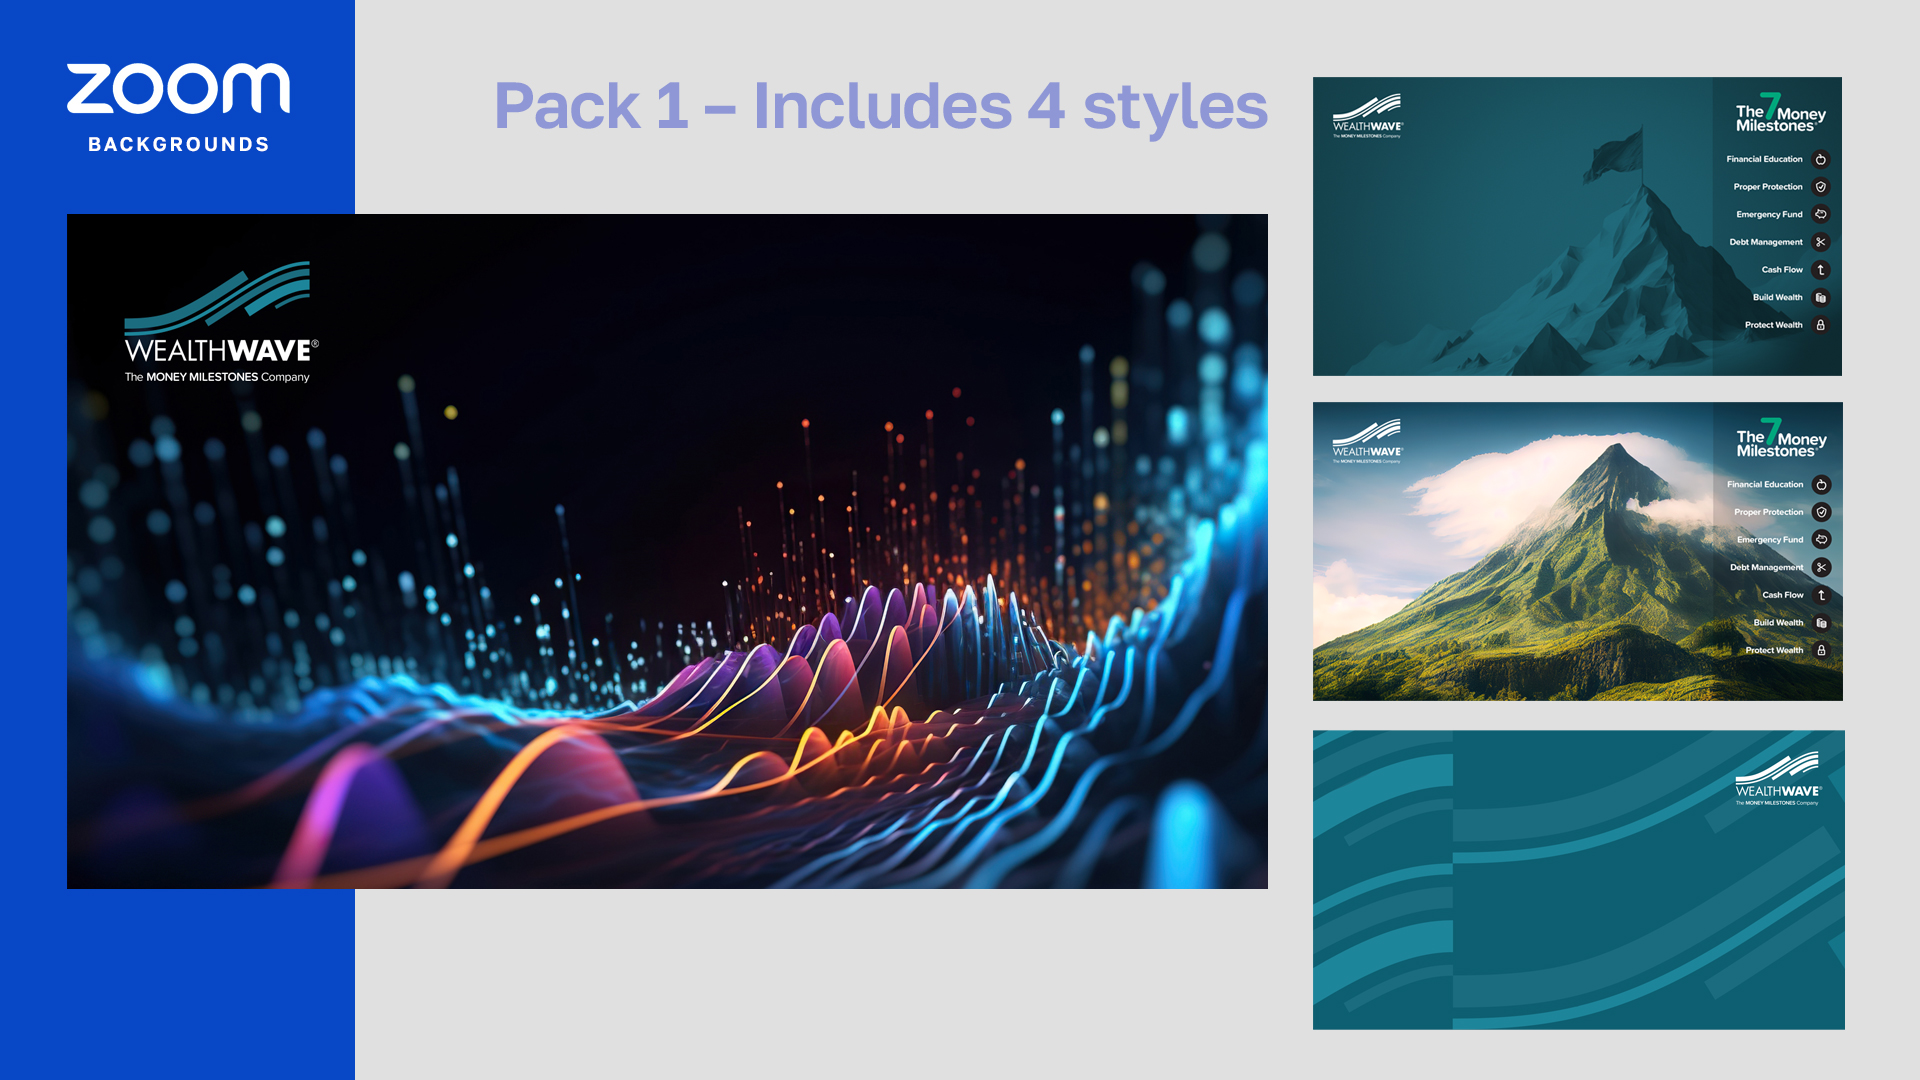 Elevate Your Virtual Presence with Our New ZOOM Background Packs